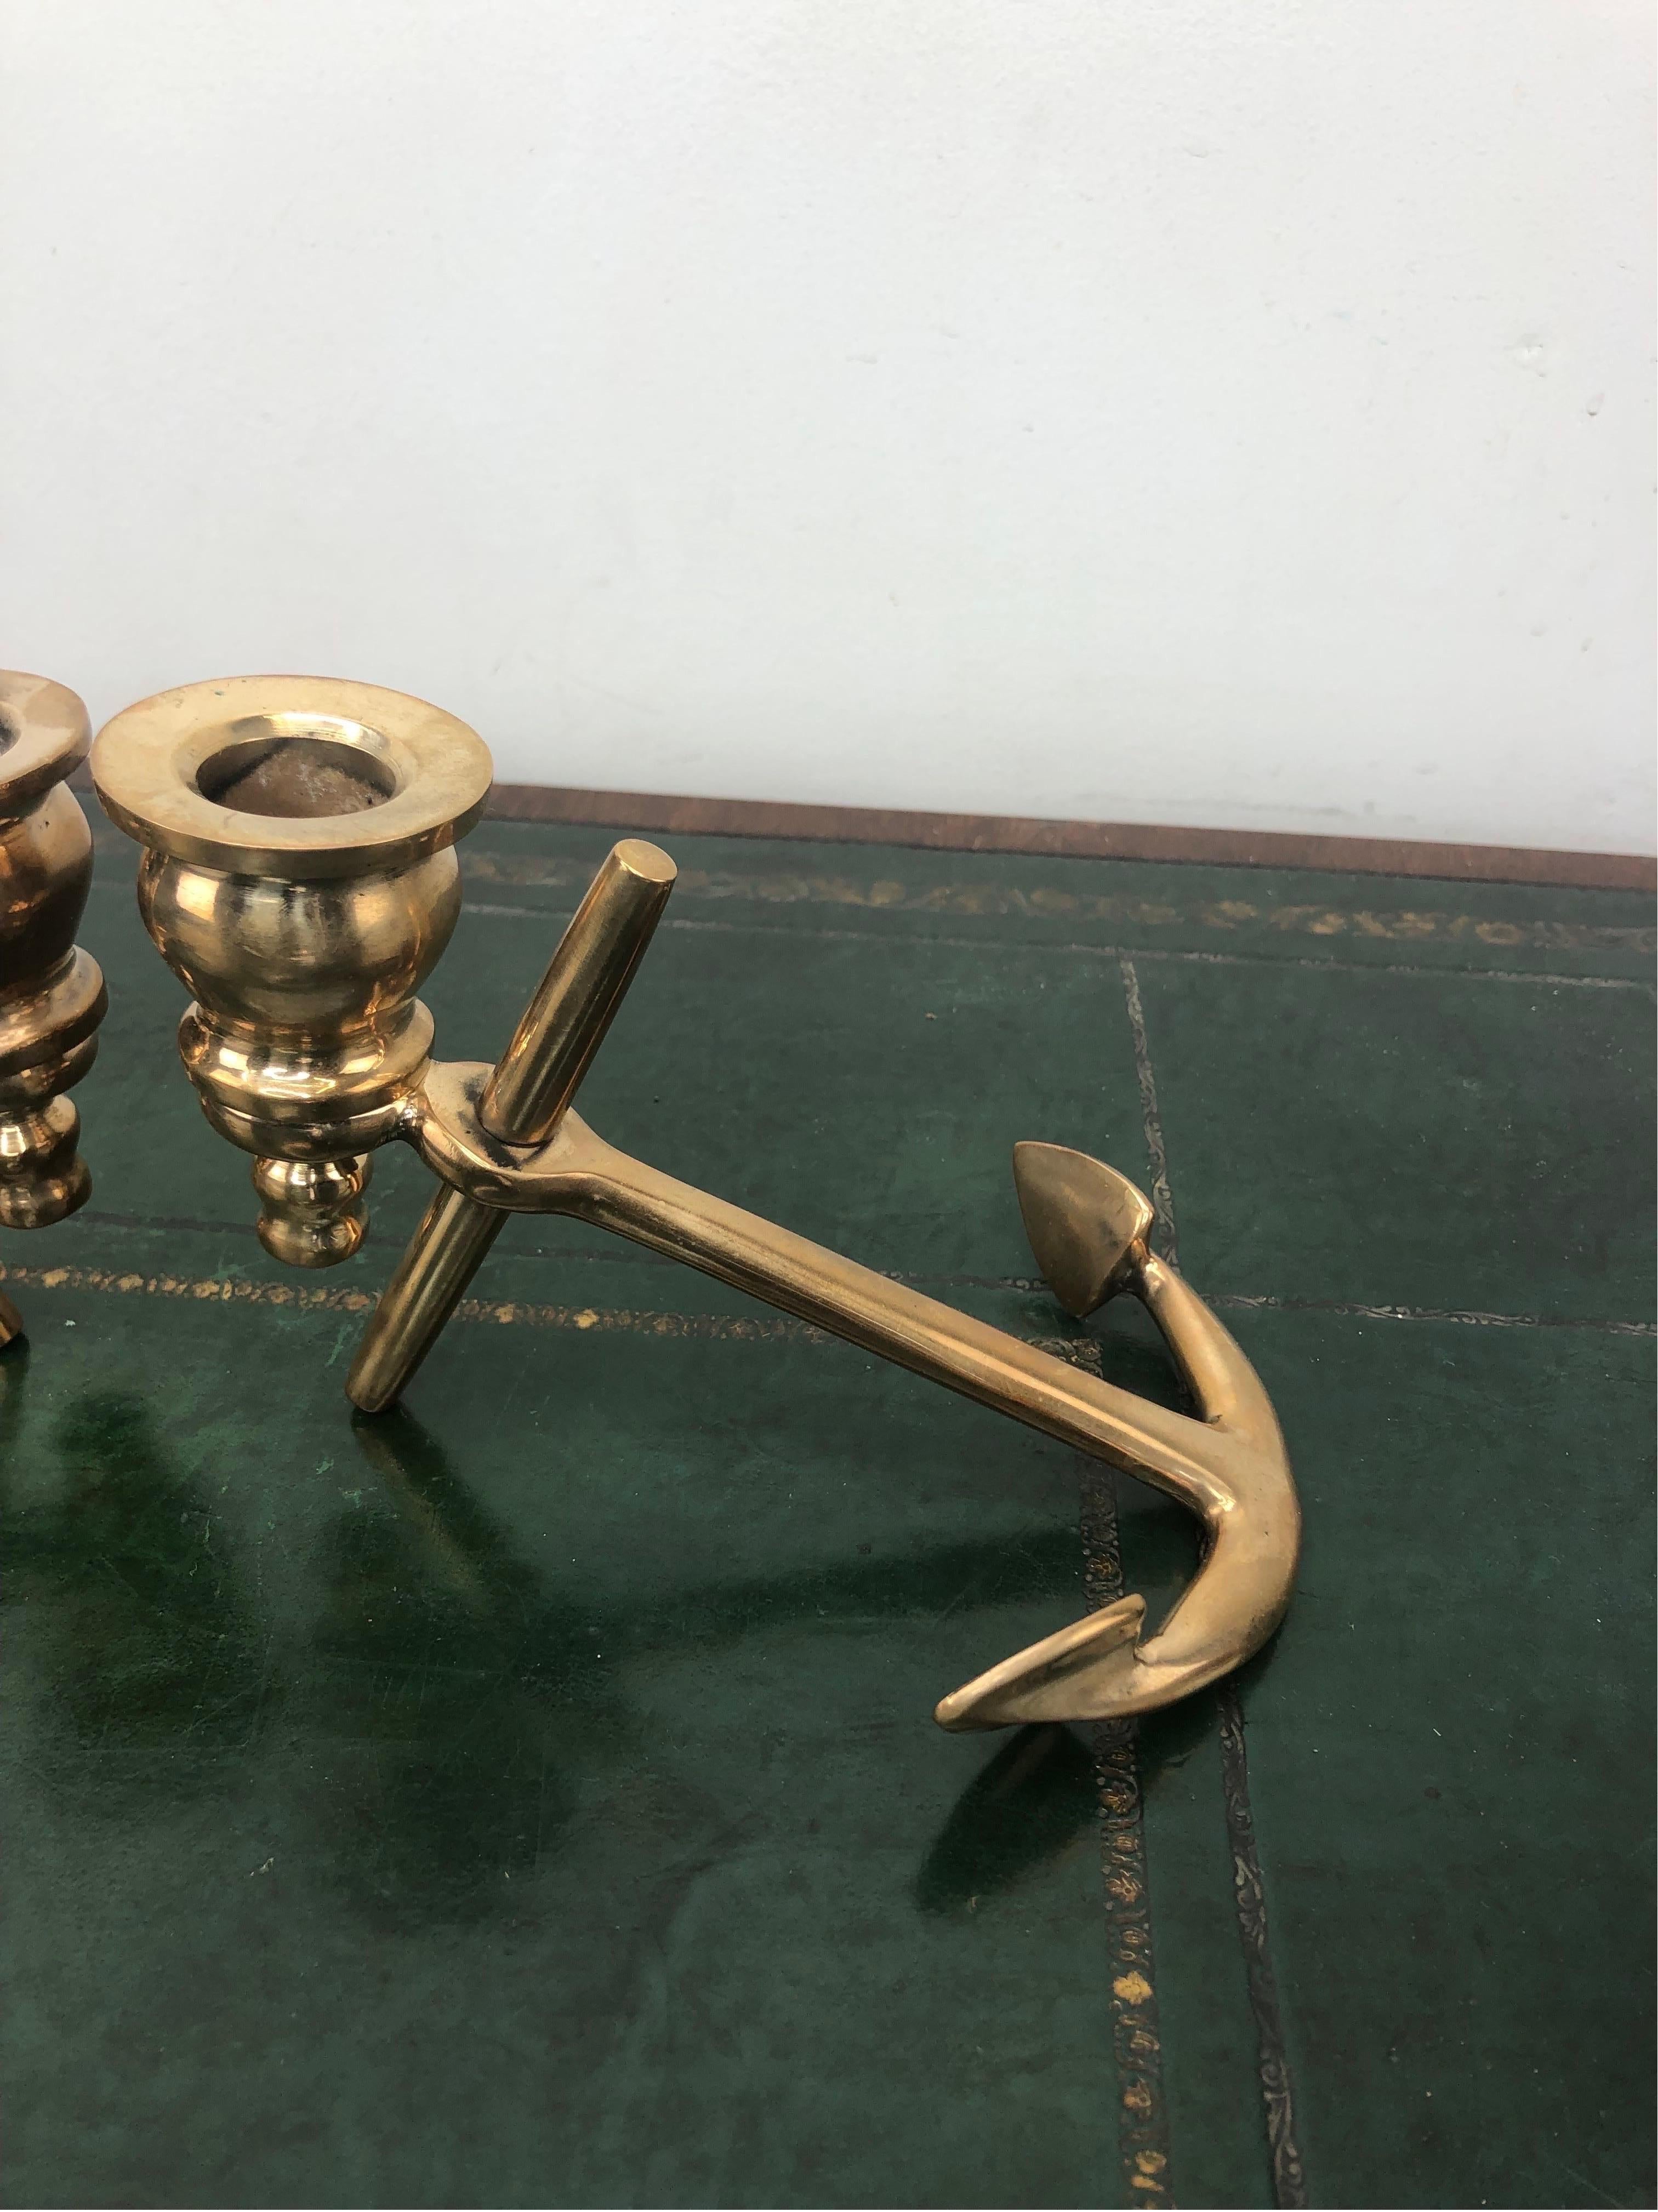 Pair of Vintage Brass Anchor Nautical Candlesticks. Made of marine brass, which has a higher copper giving the candlesticks a rosier appearance. These have been polished and will retain their shine for a long time. 